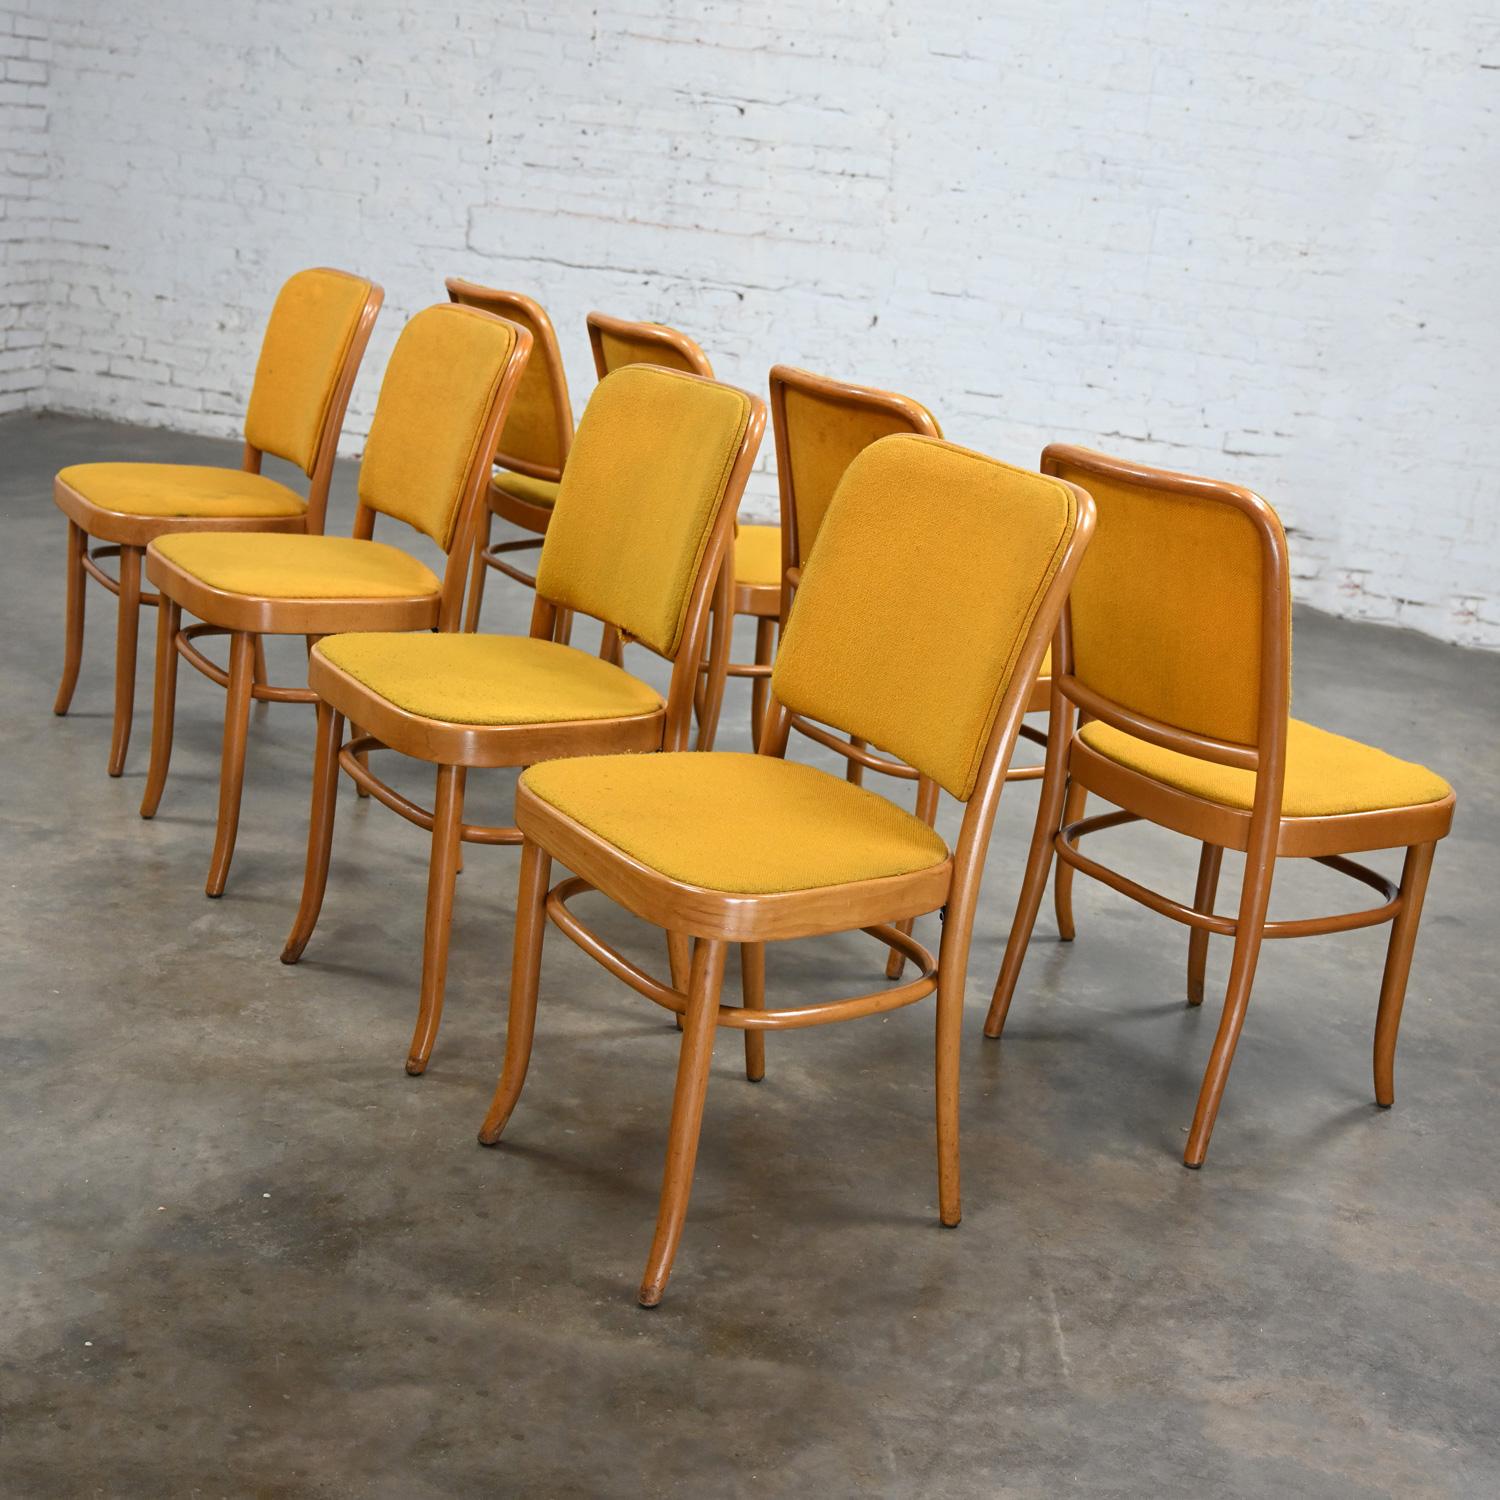 Wonderful vintage Bauhaus beech bentwood frame Thonet Josef Hoffman Prague 811 style armless side dining chairs by Falcon Products Inc., set of 8. Beautiful condition, keeping in mind that these are vintage and not new so will have signs of use and